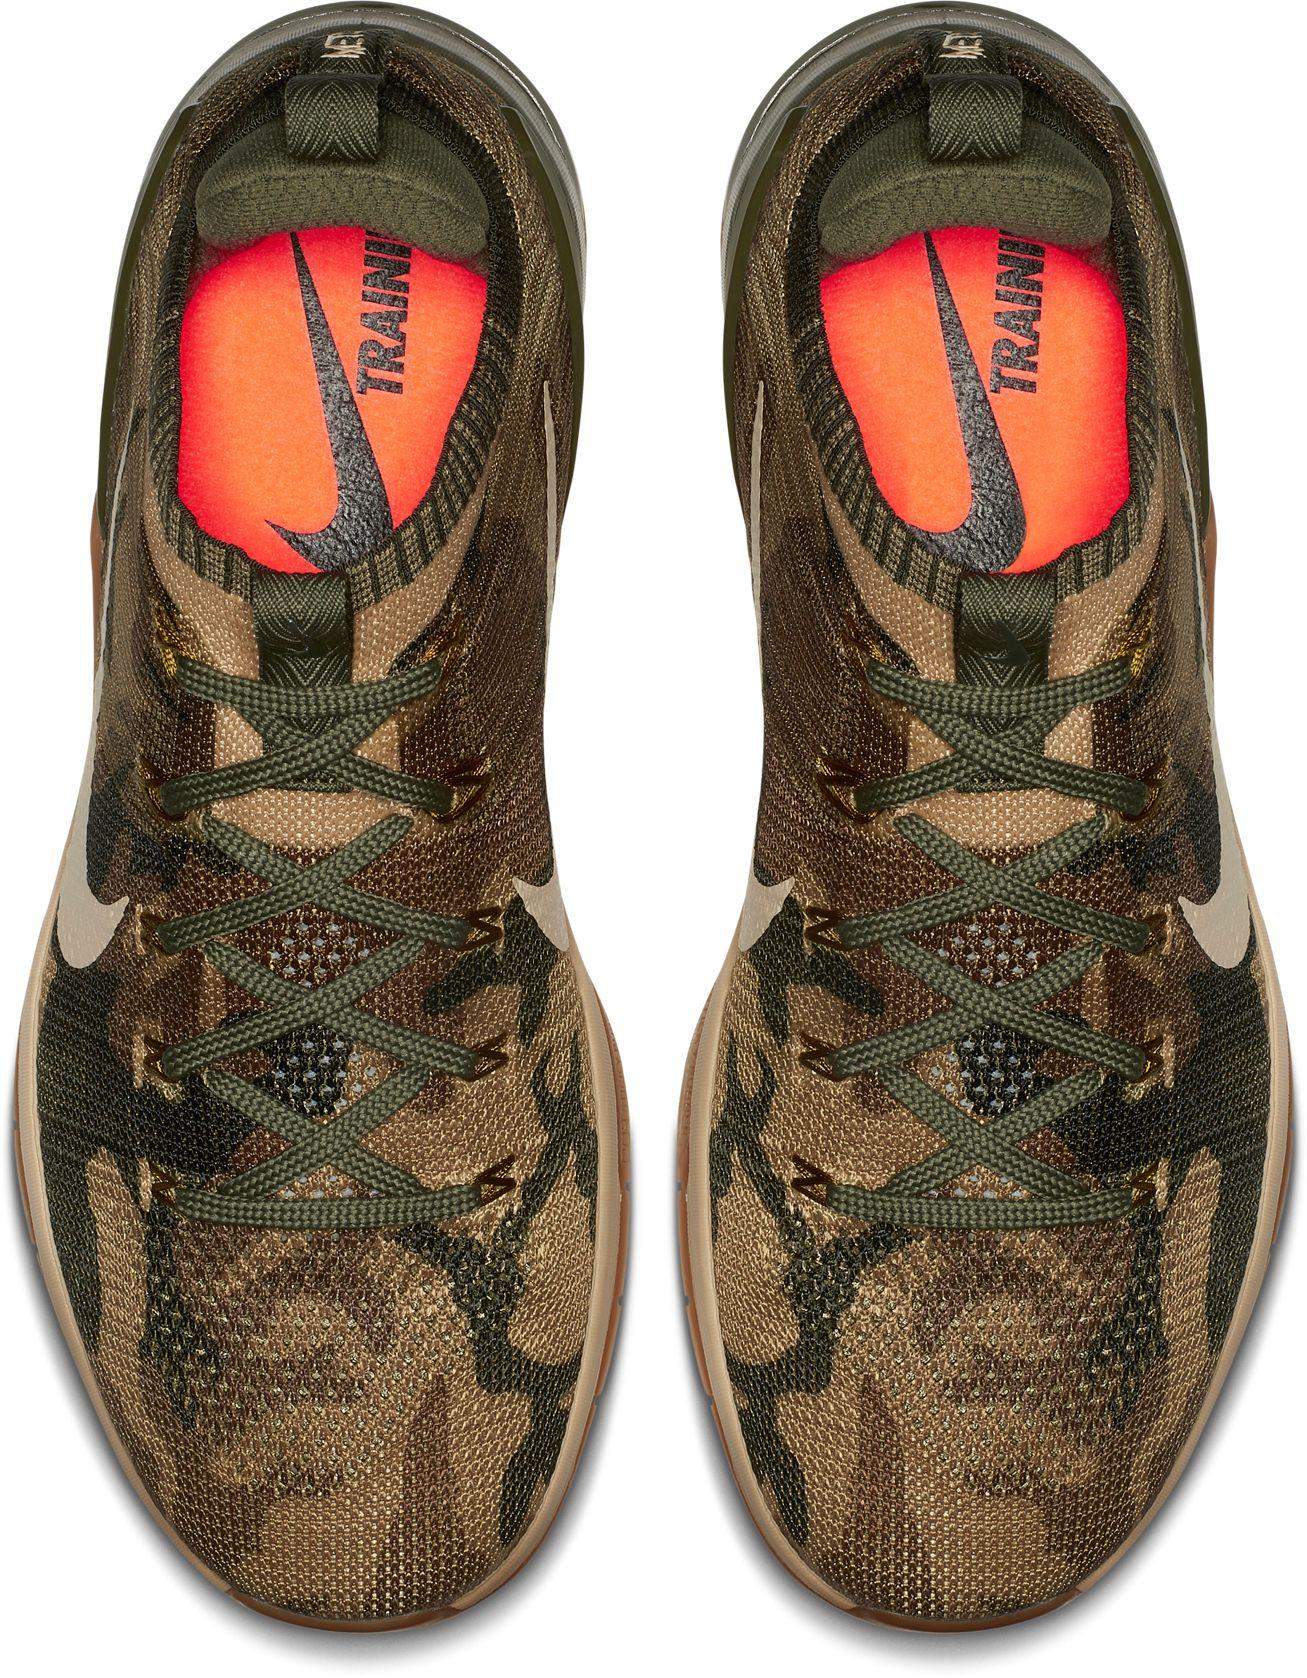 Nike Metcon Dsx Flyknit 2 Camo Training Shoes in Green for